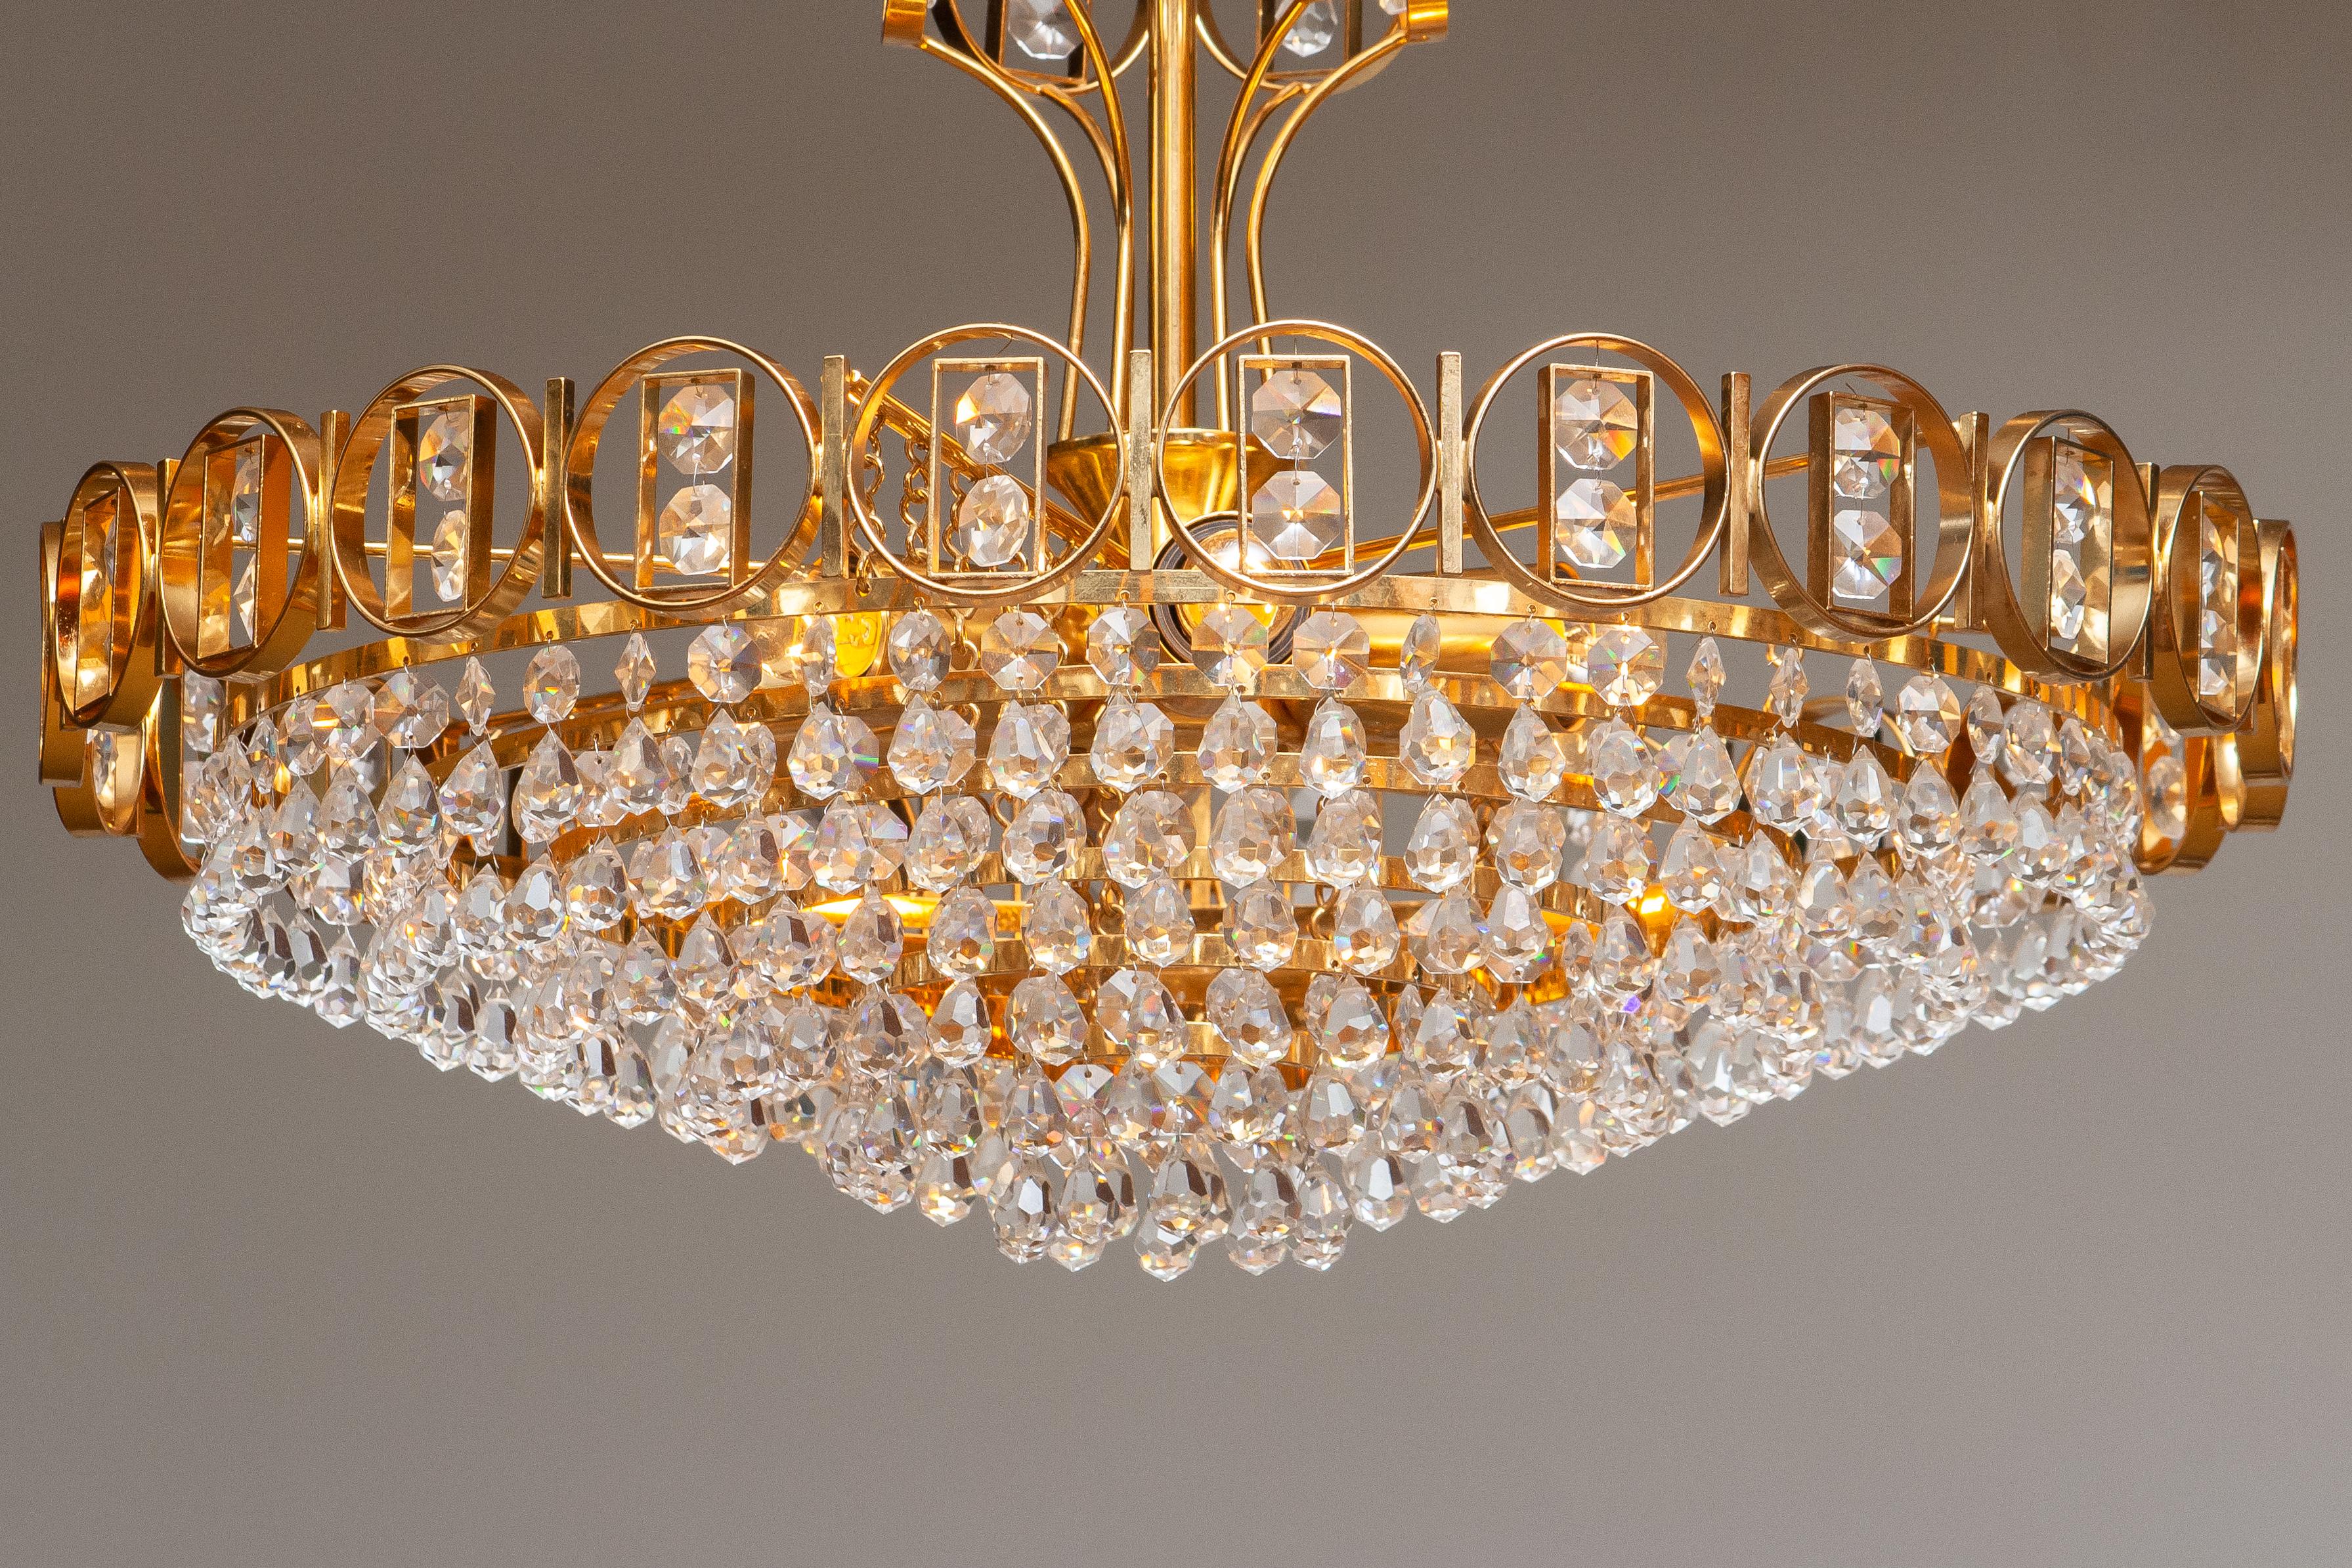 Mid-Century Modern 1970s, Gold Plaited Brass Chandelier with Faceted Crystals Made by Palwa Germany